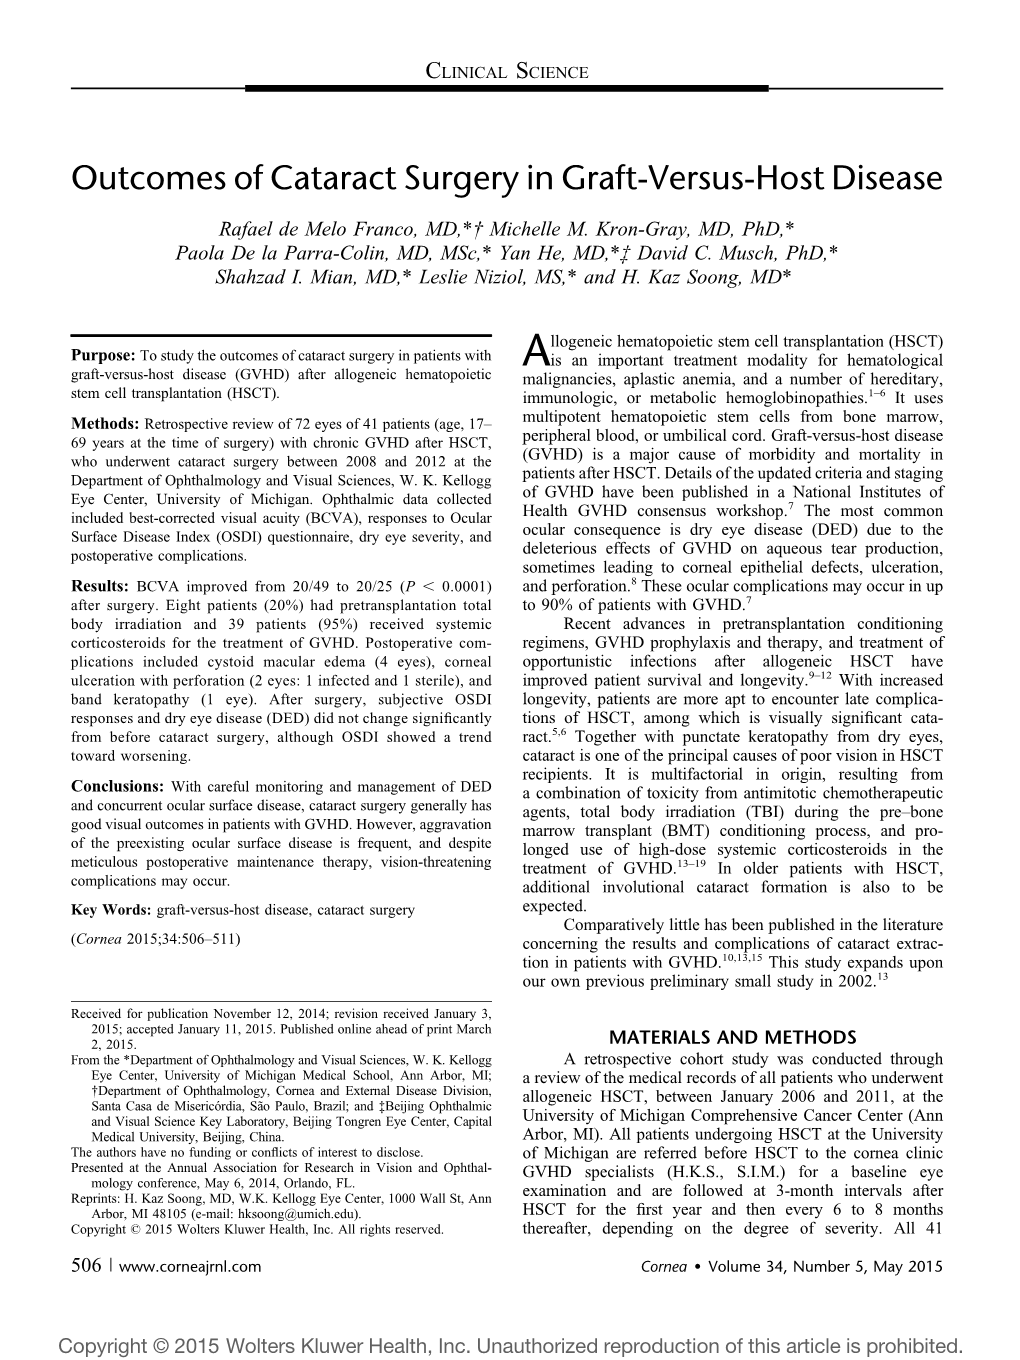 Outcomes of Cataract Surgery in Graft-Versus-Host Disease